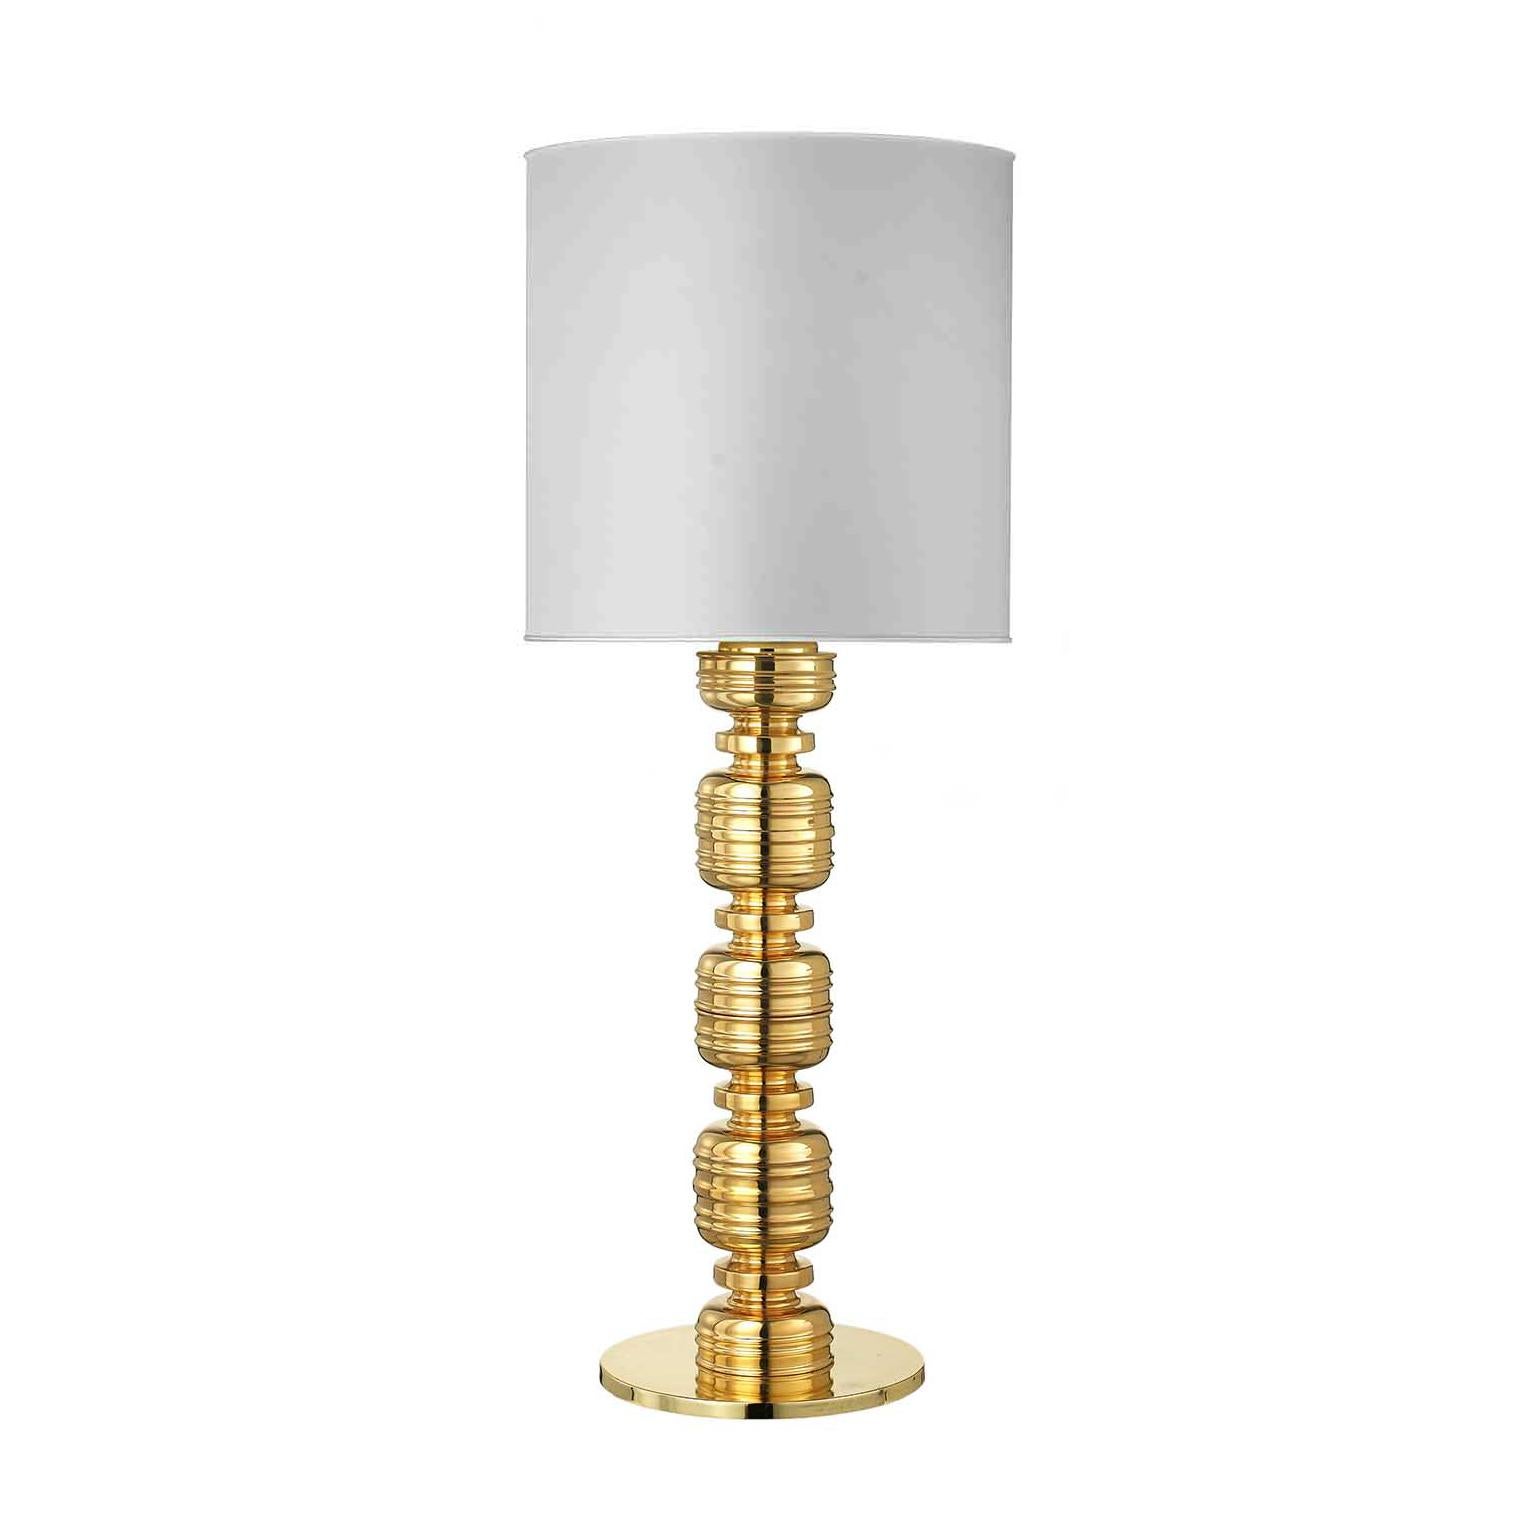 Italian THEA 2, Ceramic Lamp Handcrafted in 24-Karat Gold by Gabriella B. Made in Italy For Sale